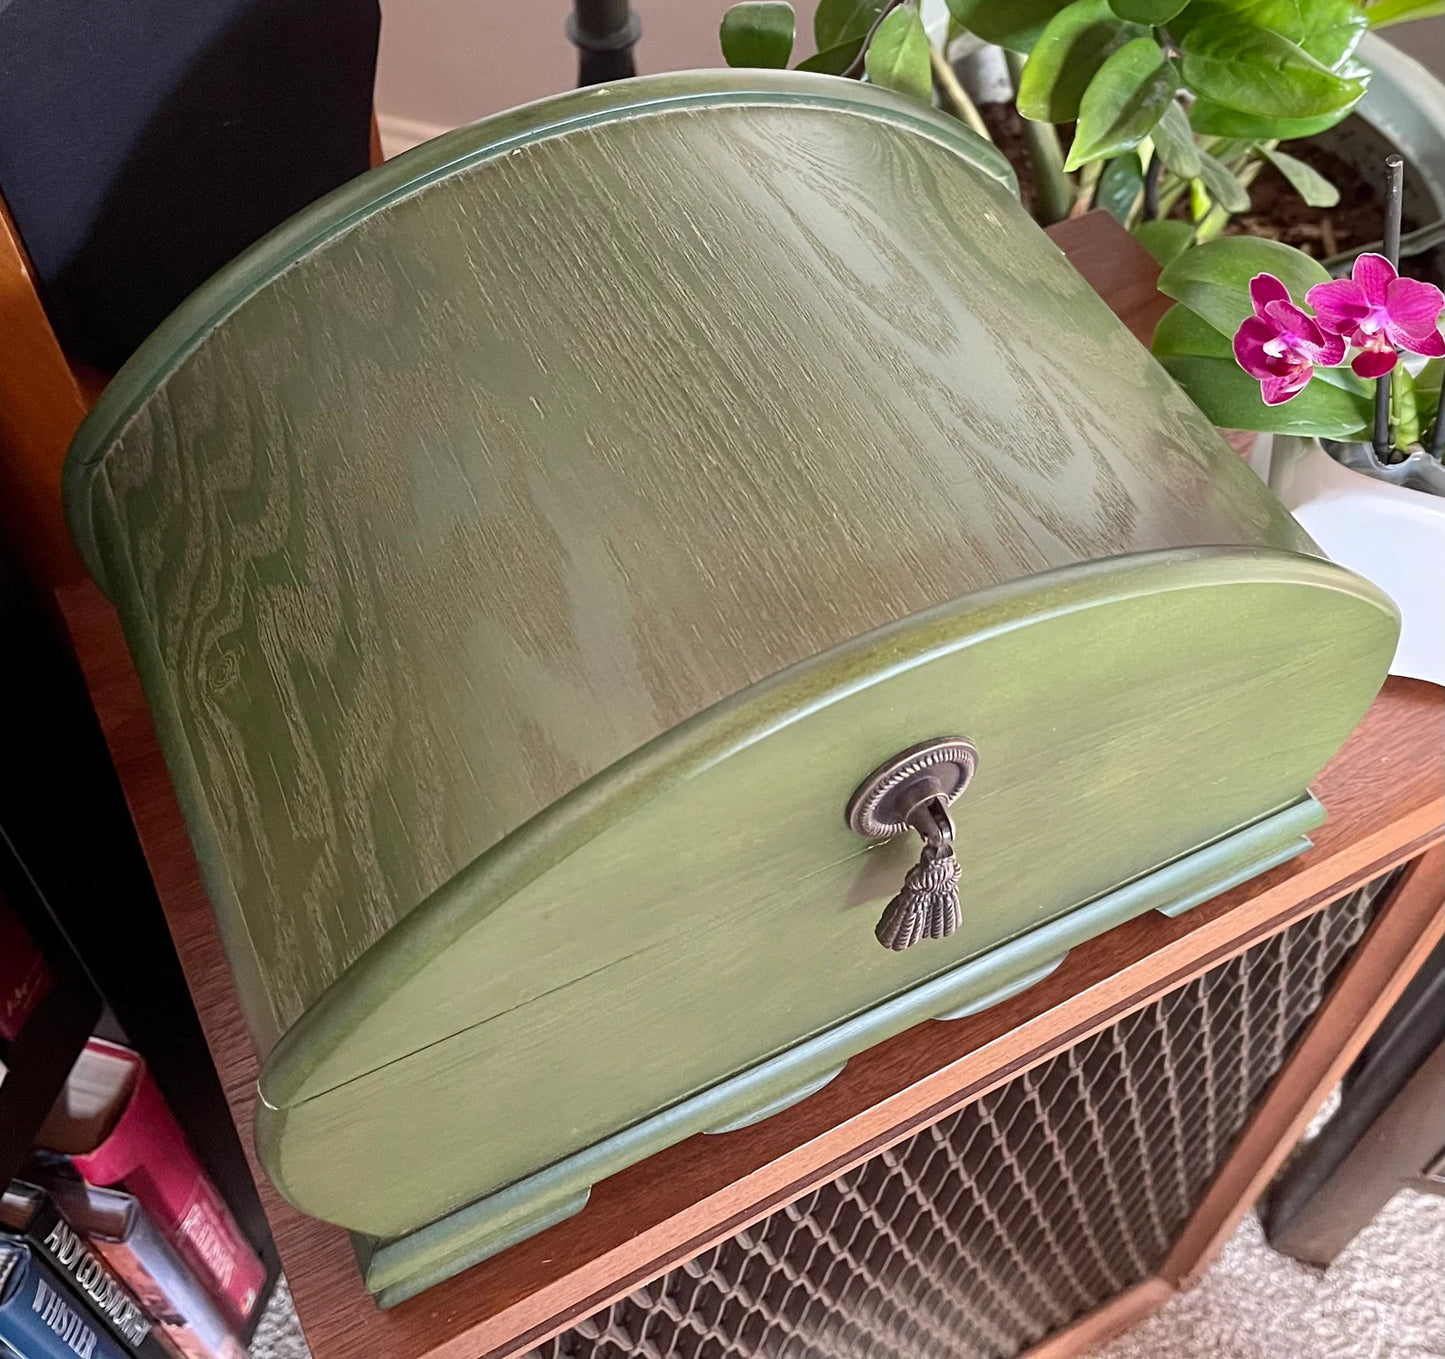 Fabulous Vintage Chest, Green Witch Mystical Storage Chest, Old World Vintage